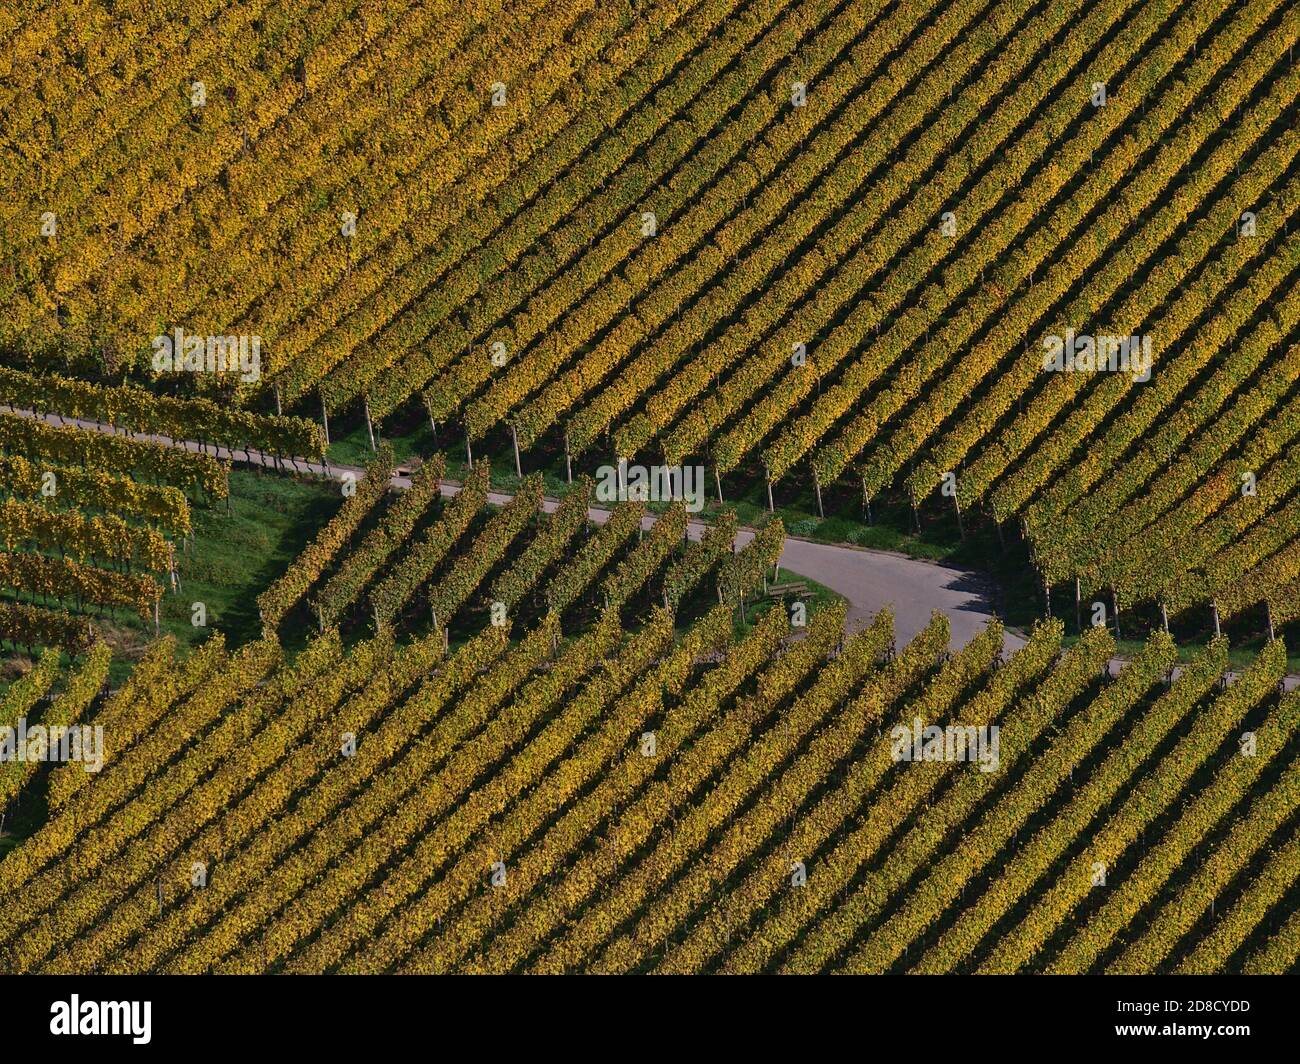 Aerial close-up view of an agricultural road intersection surrounded by patterned vineyards with beautiful colored fading vine leaves. Stock Photo